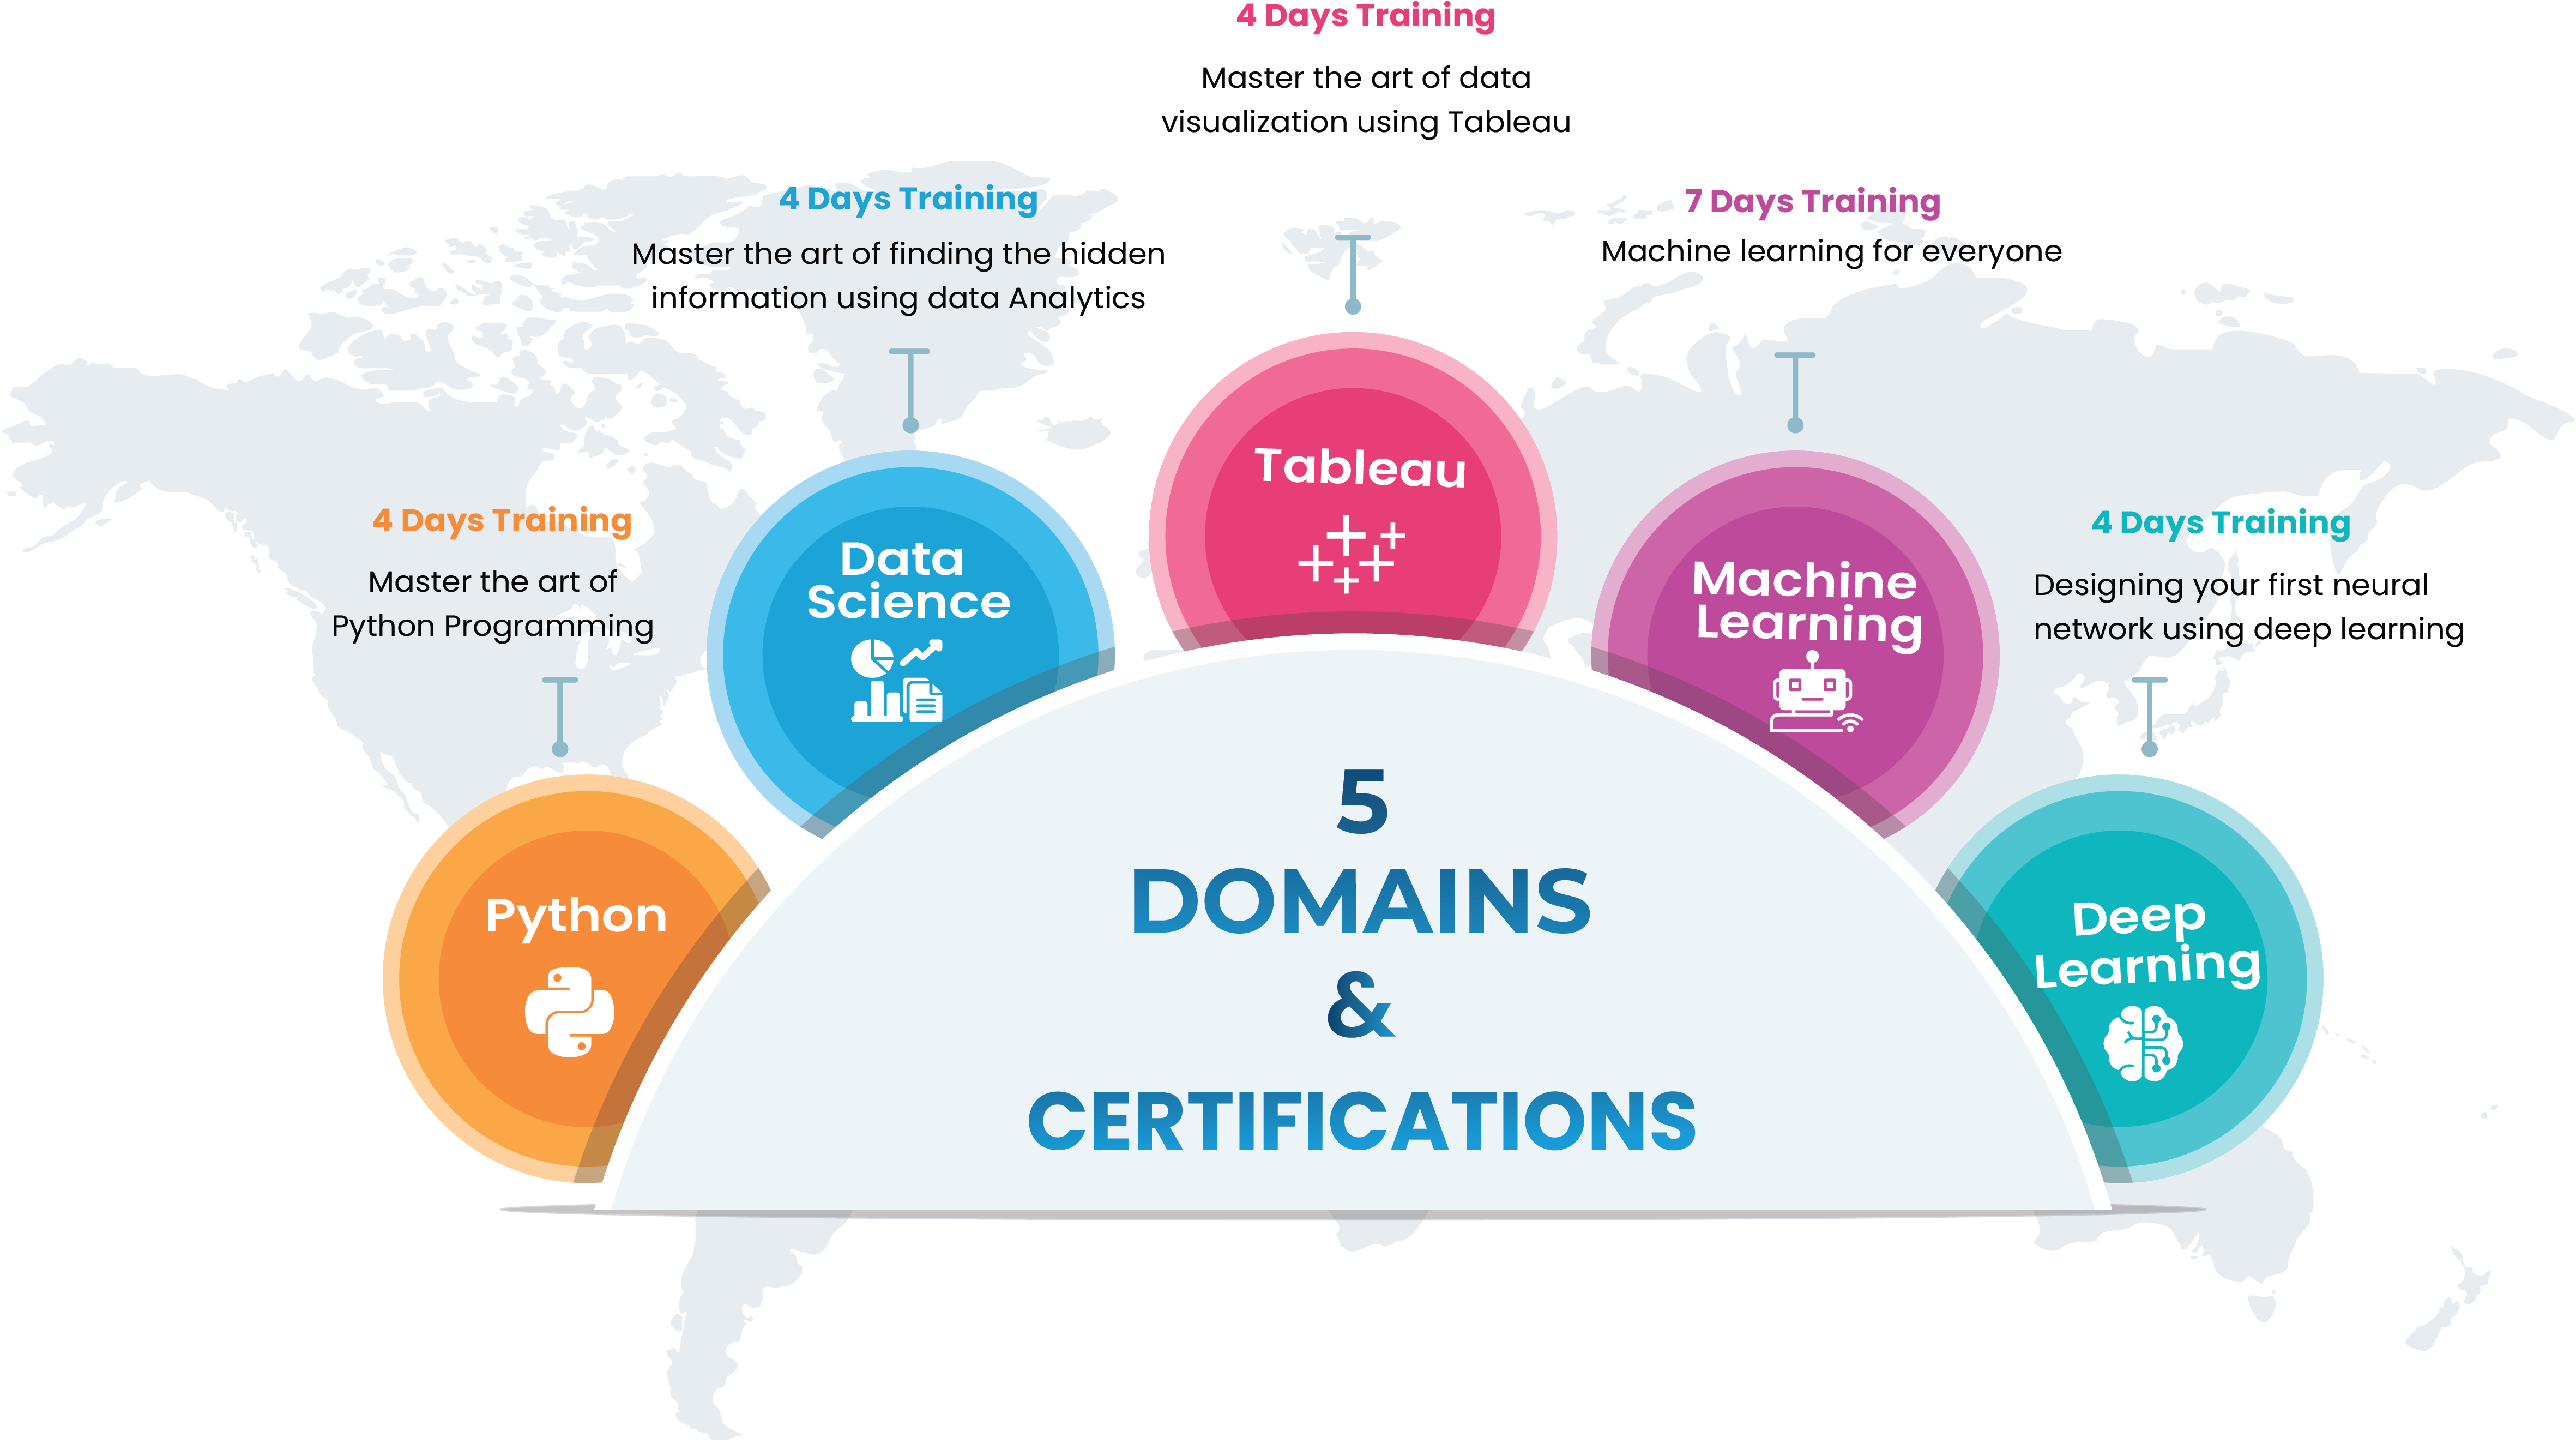 Domains and certifications